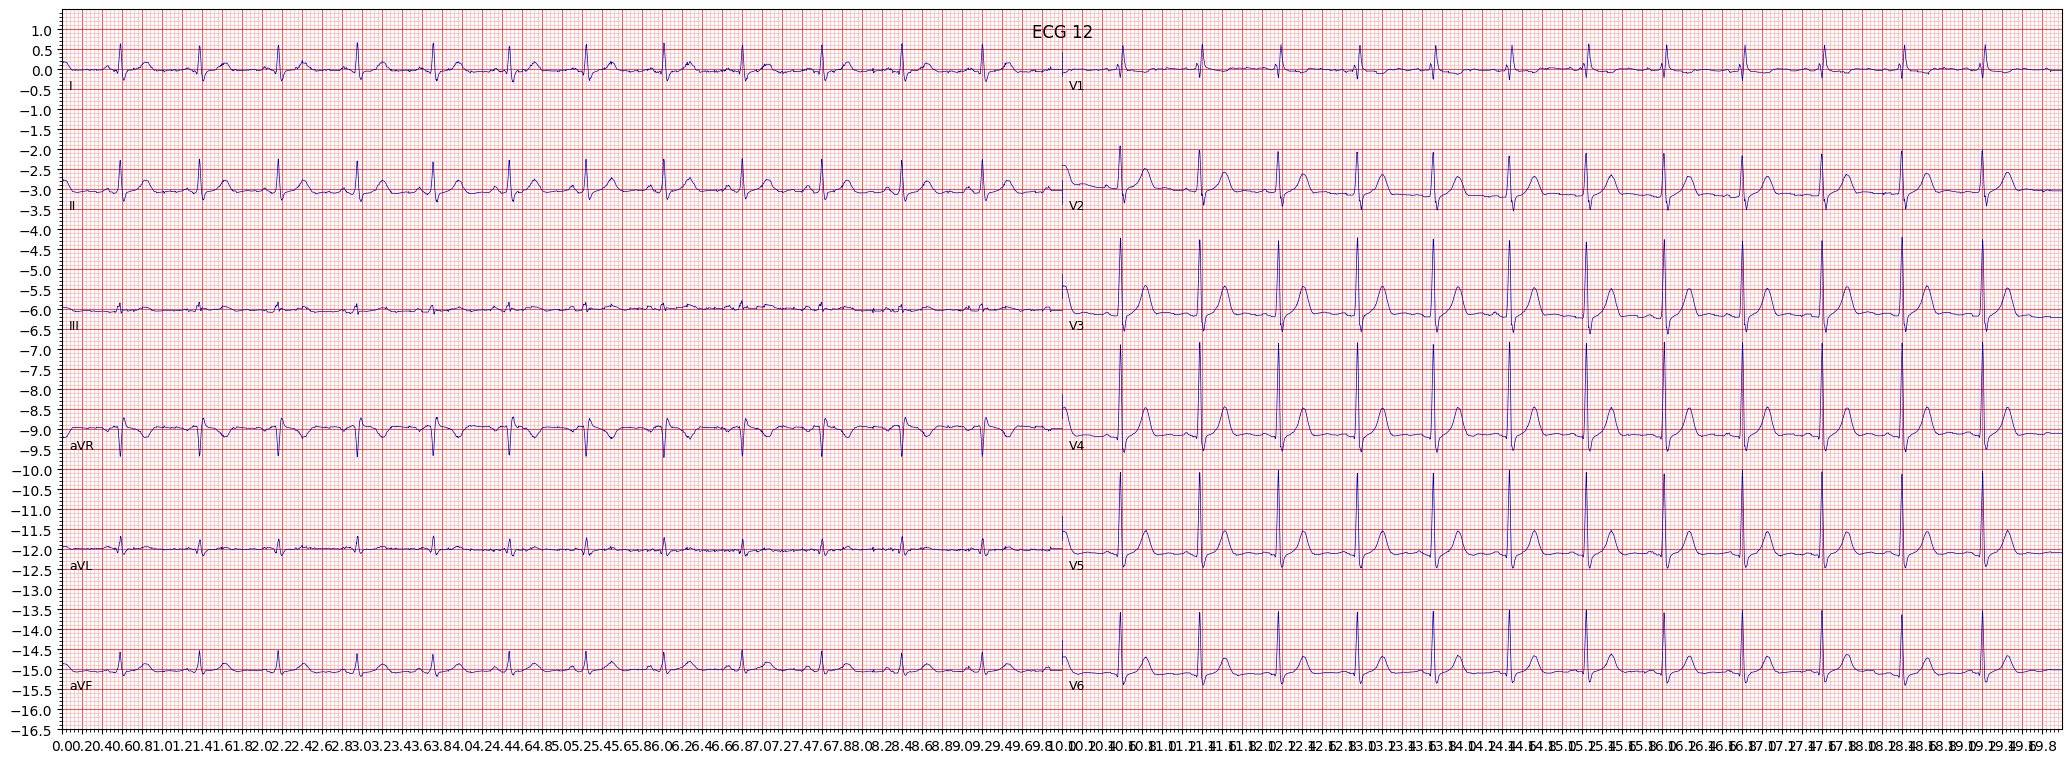 incomplete right bundle branch block (IRBBB) example 724